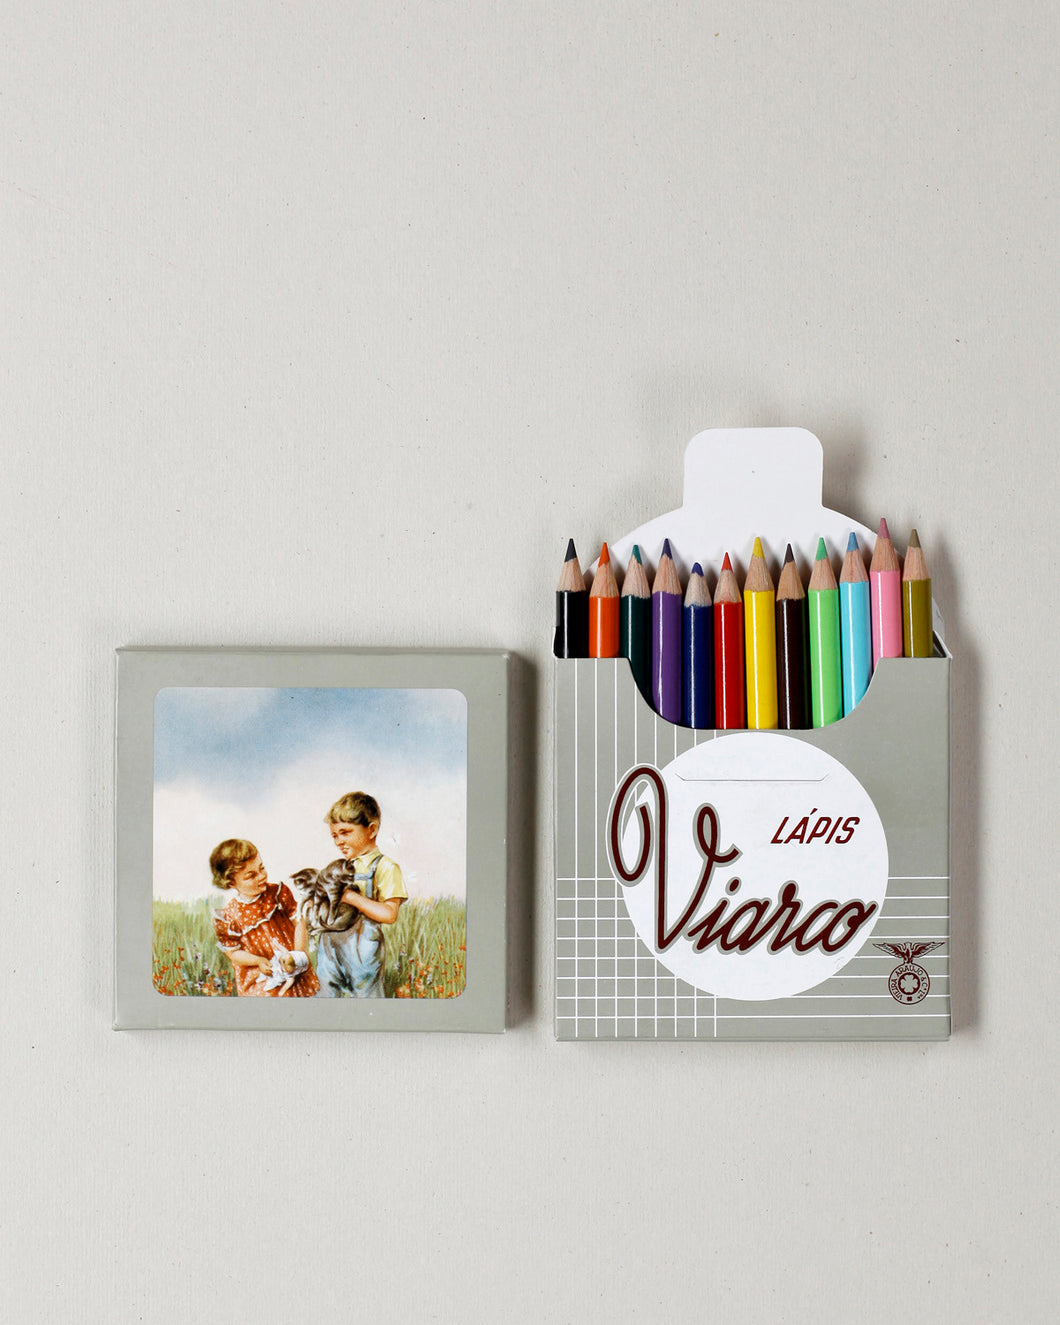 Girl and Boy with Cat Coloured Pencil Box by Viarco made in Portugal